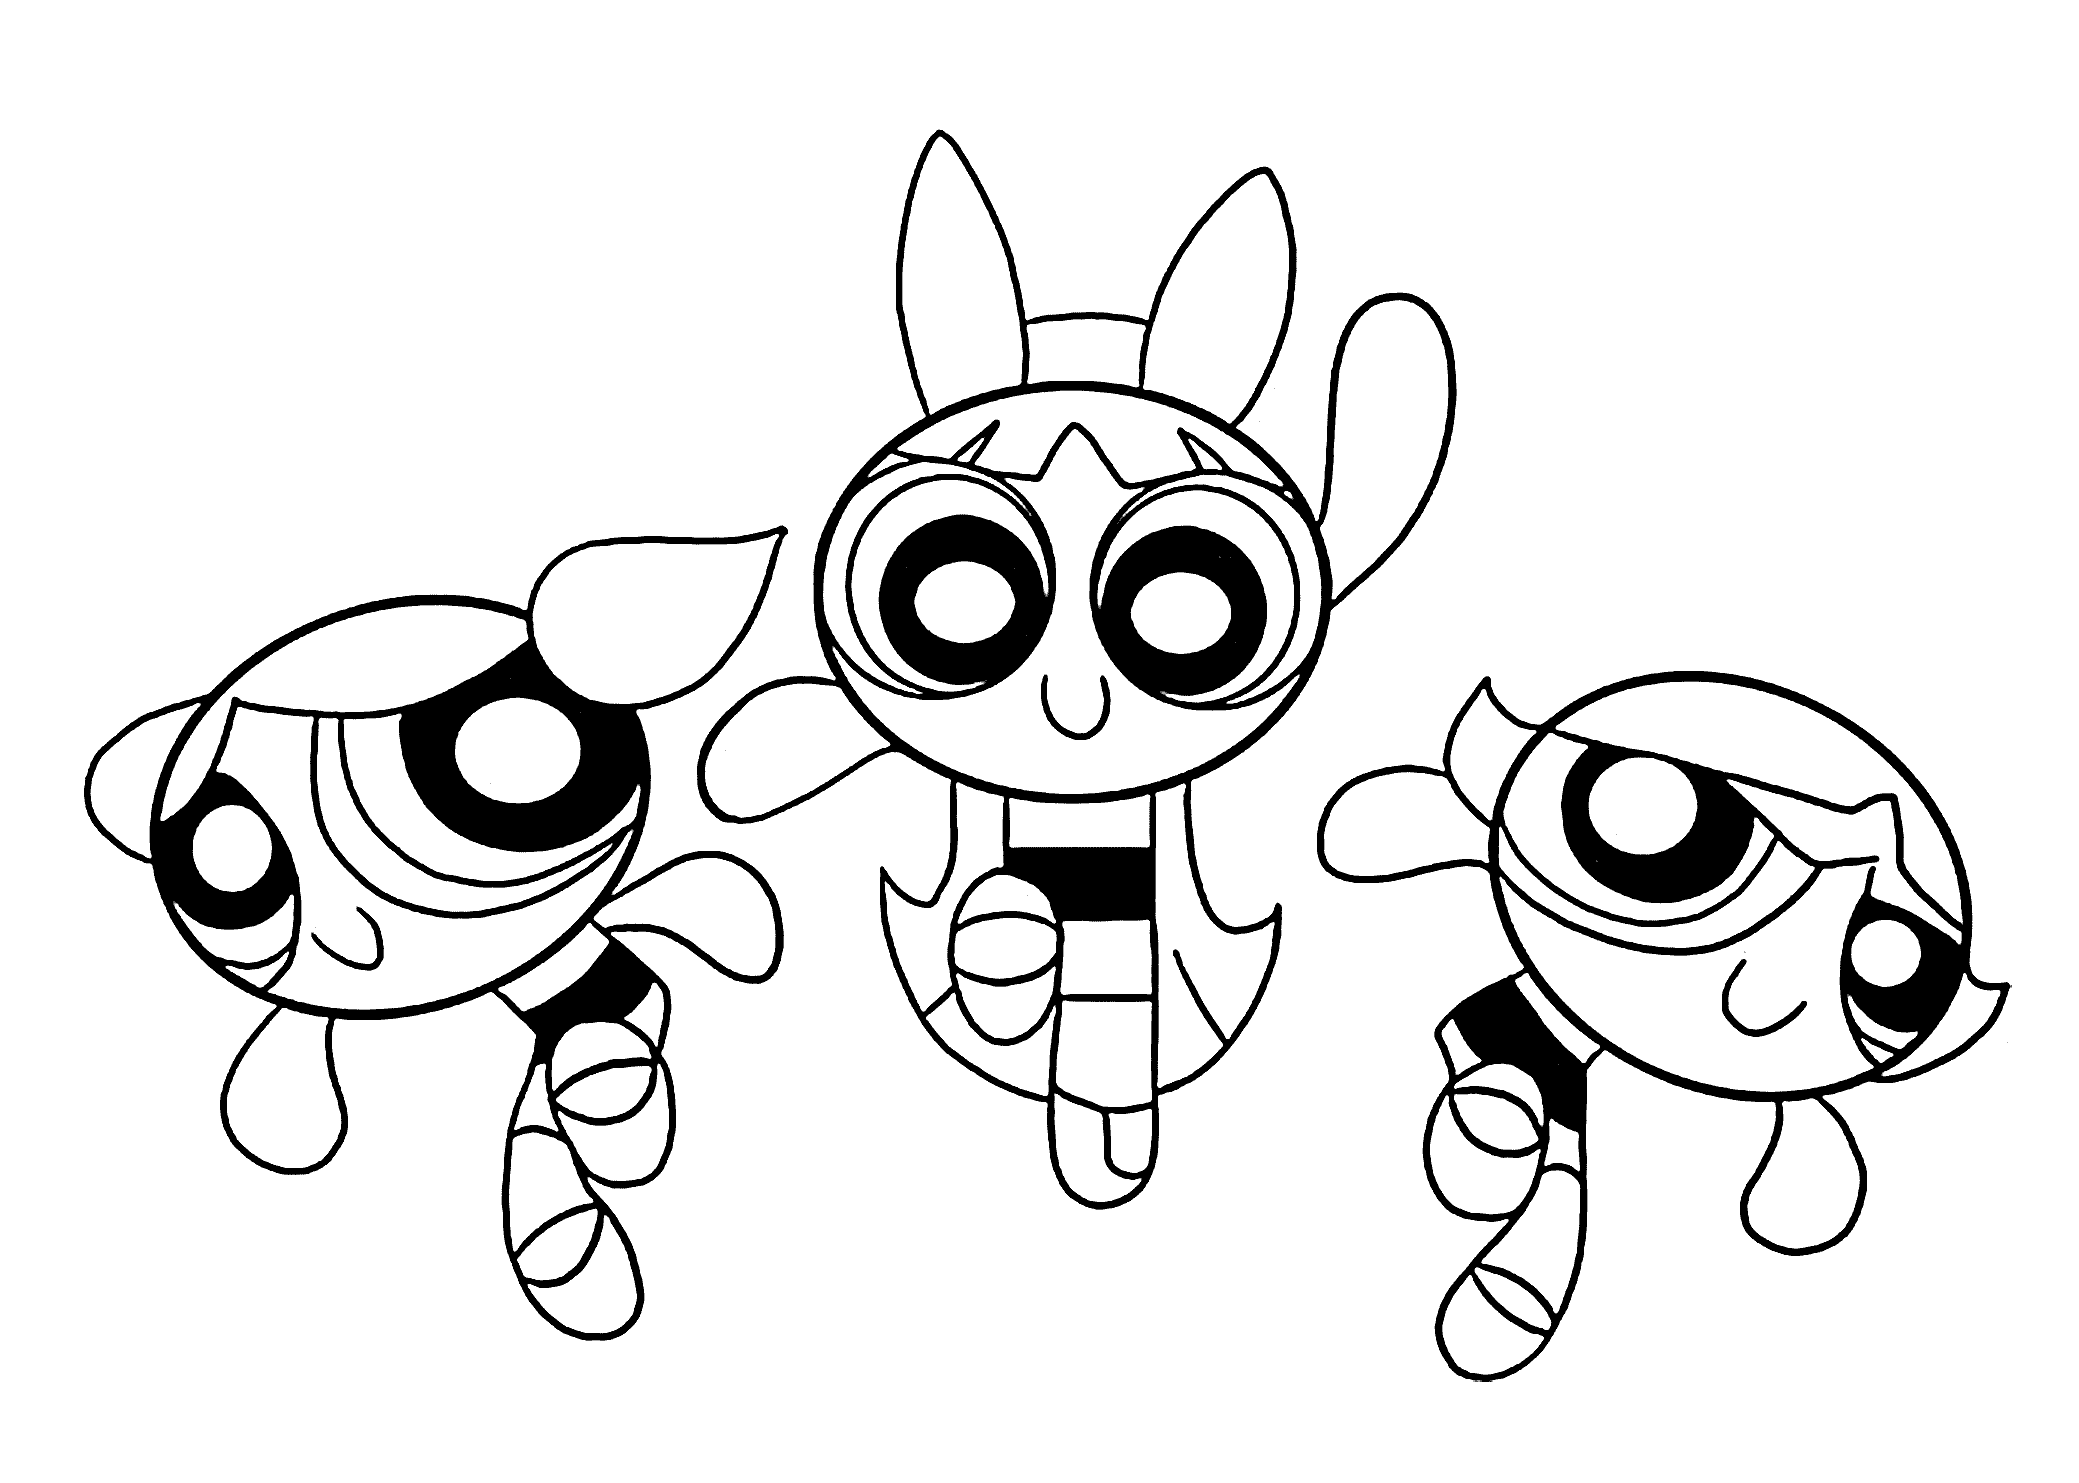 Related Powerpuff Girls Coloring Pages item-4750, Powerpuff Girls ...